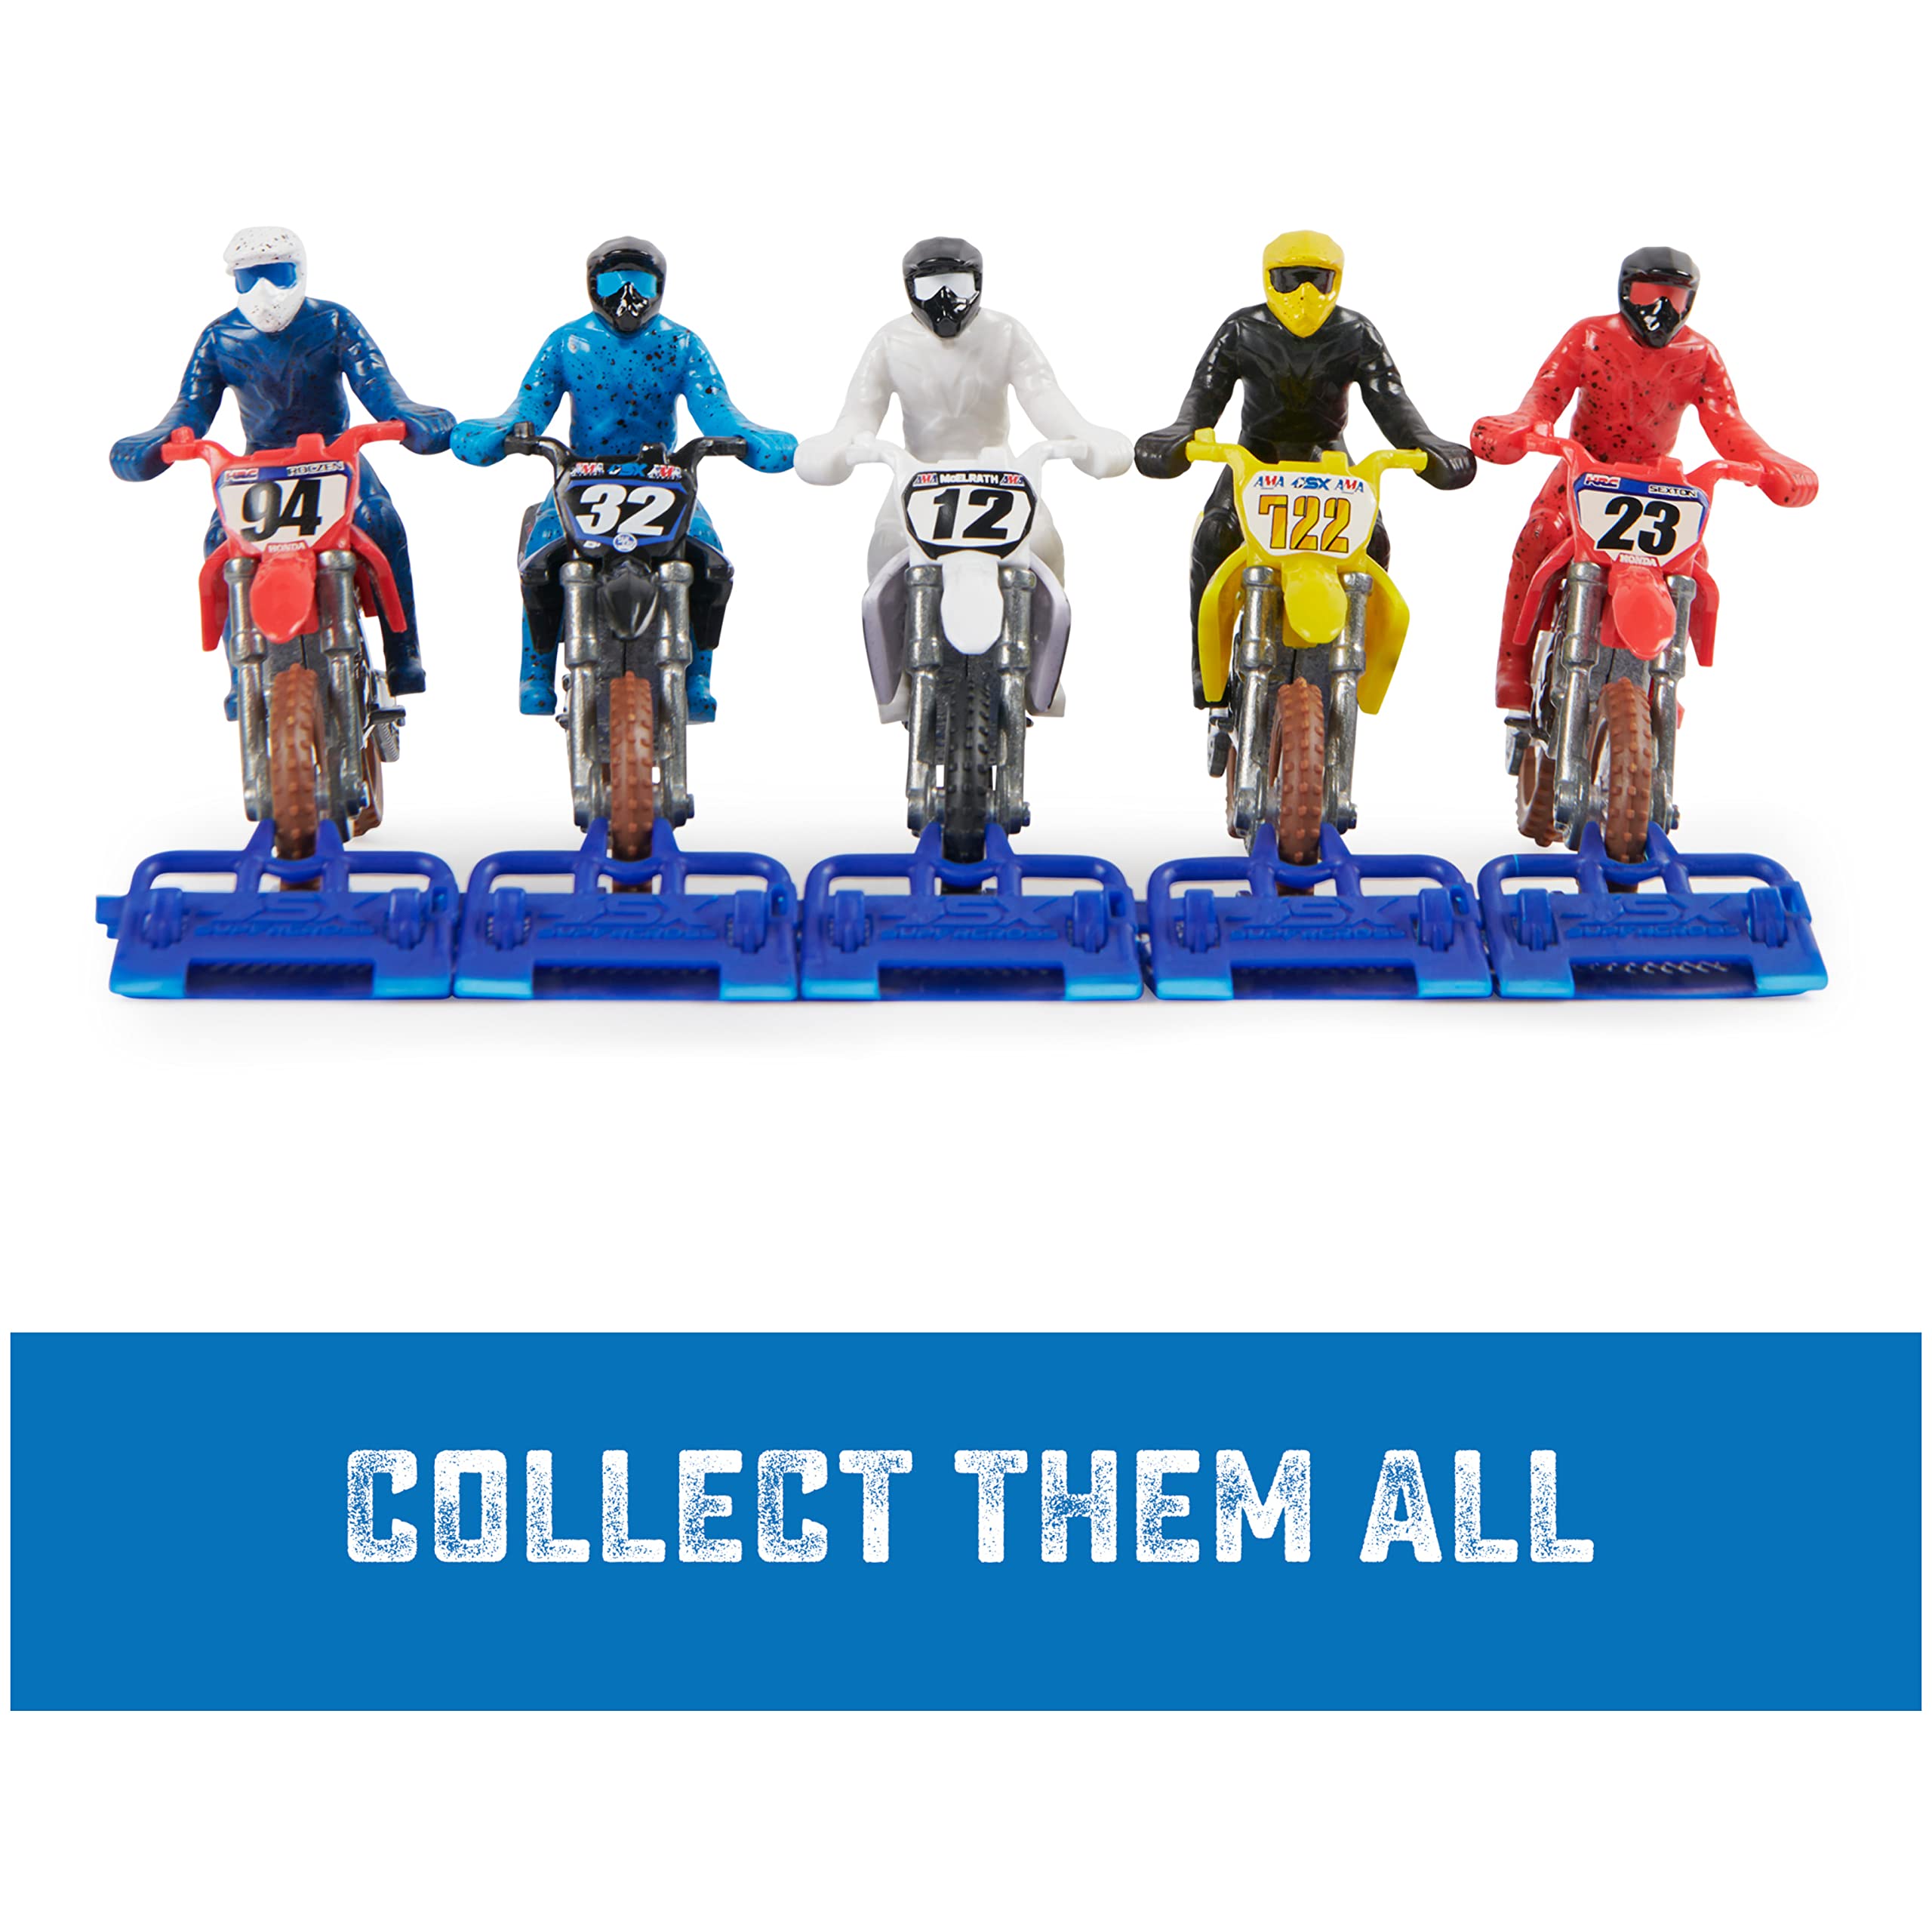 Supercross, Authentic 5-Pack of 1:24 Scale Die-Cast Motorcycles with Rider Figure, Toy Moto Bike for Kids and Collectors Ages 3 and up